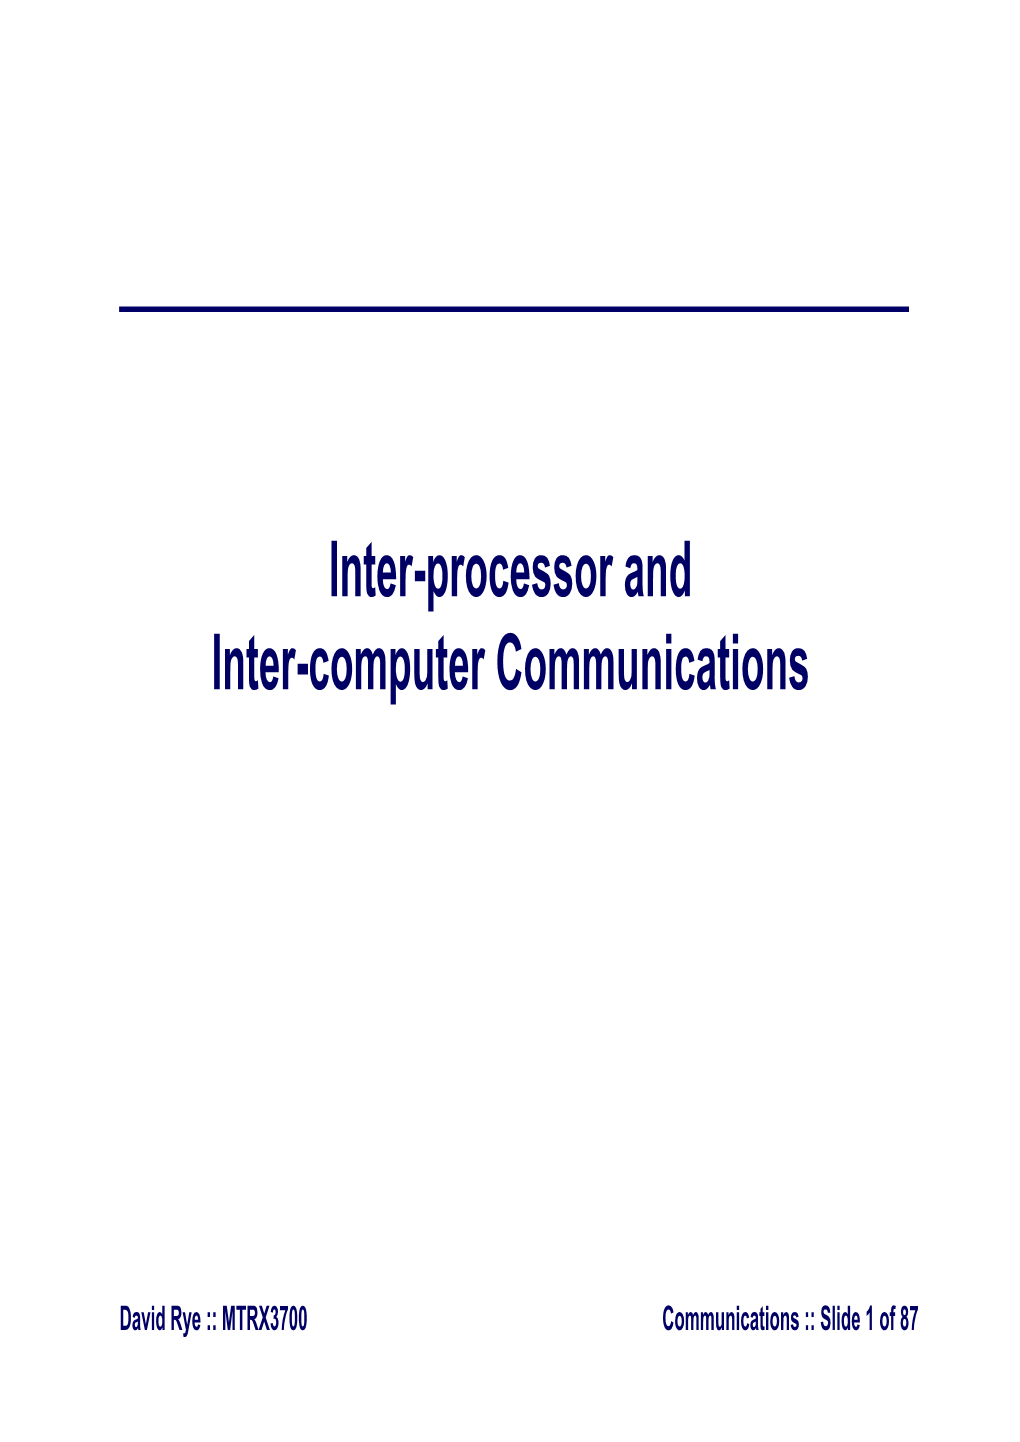 Inter-Processor and Inter-Computer Communications